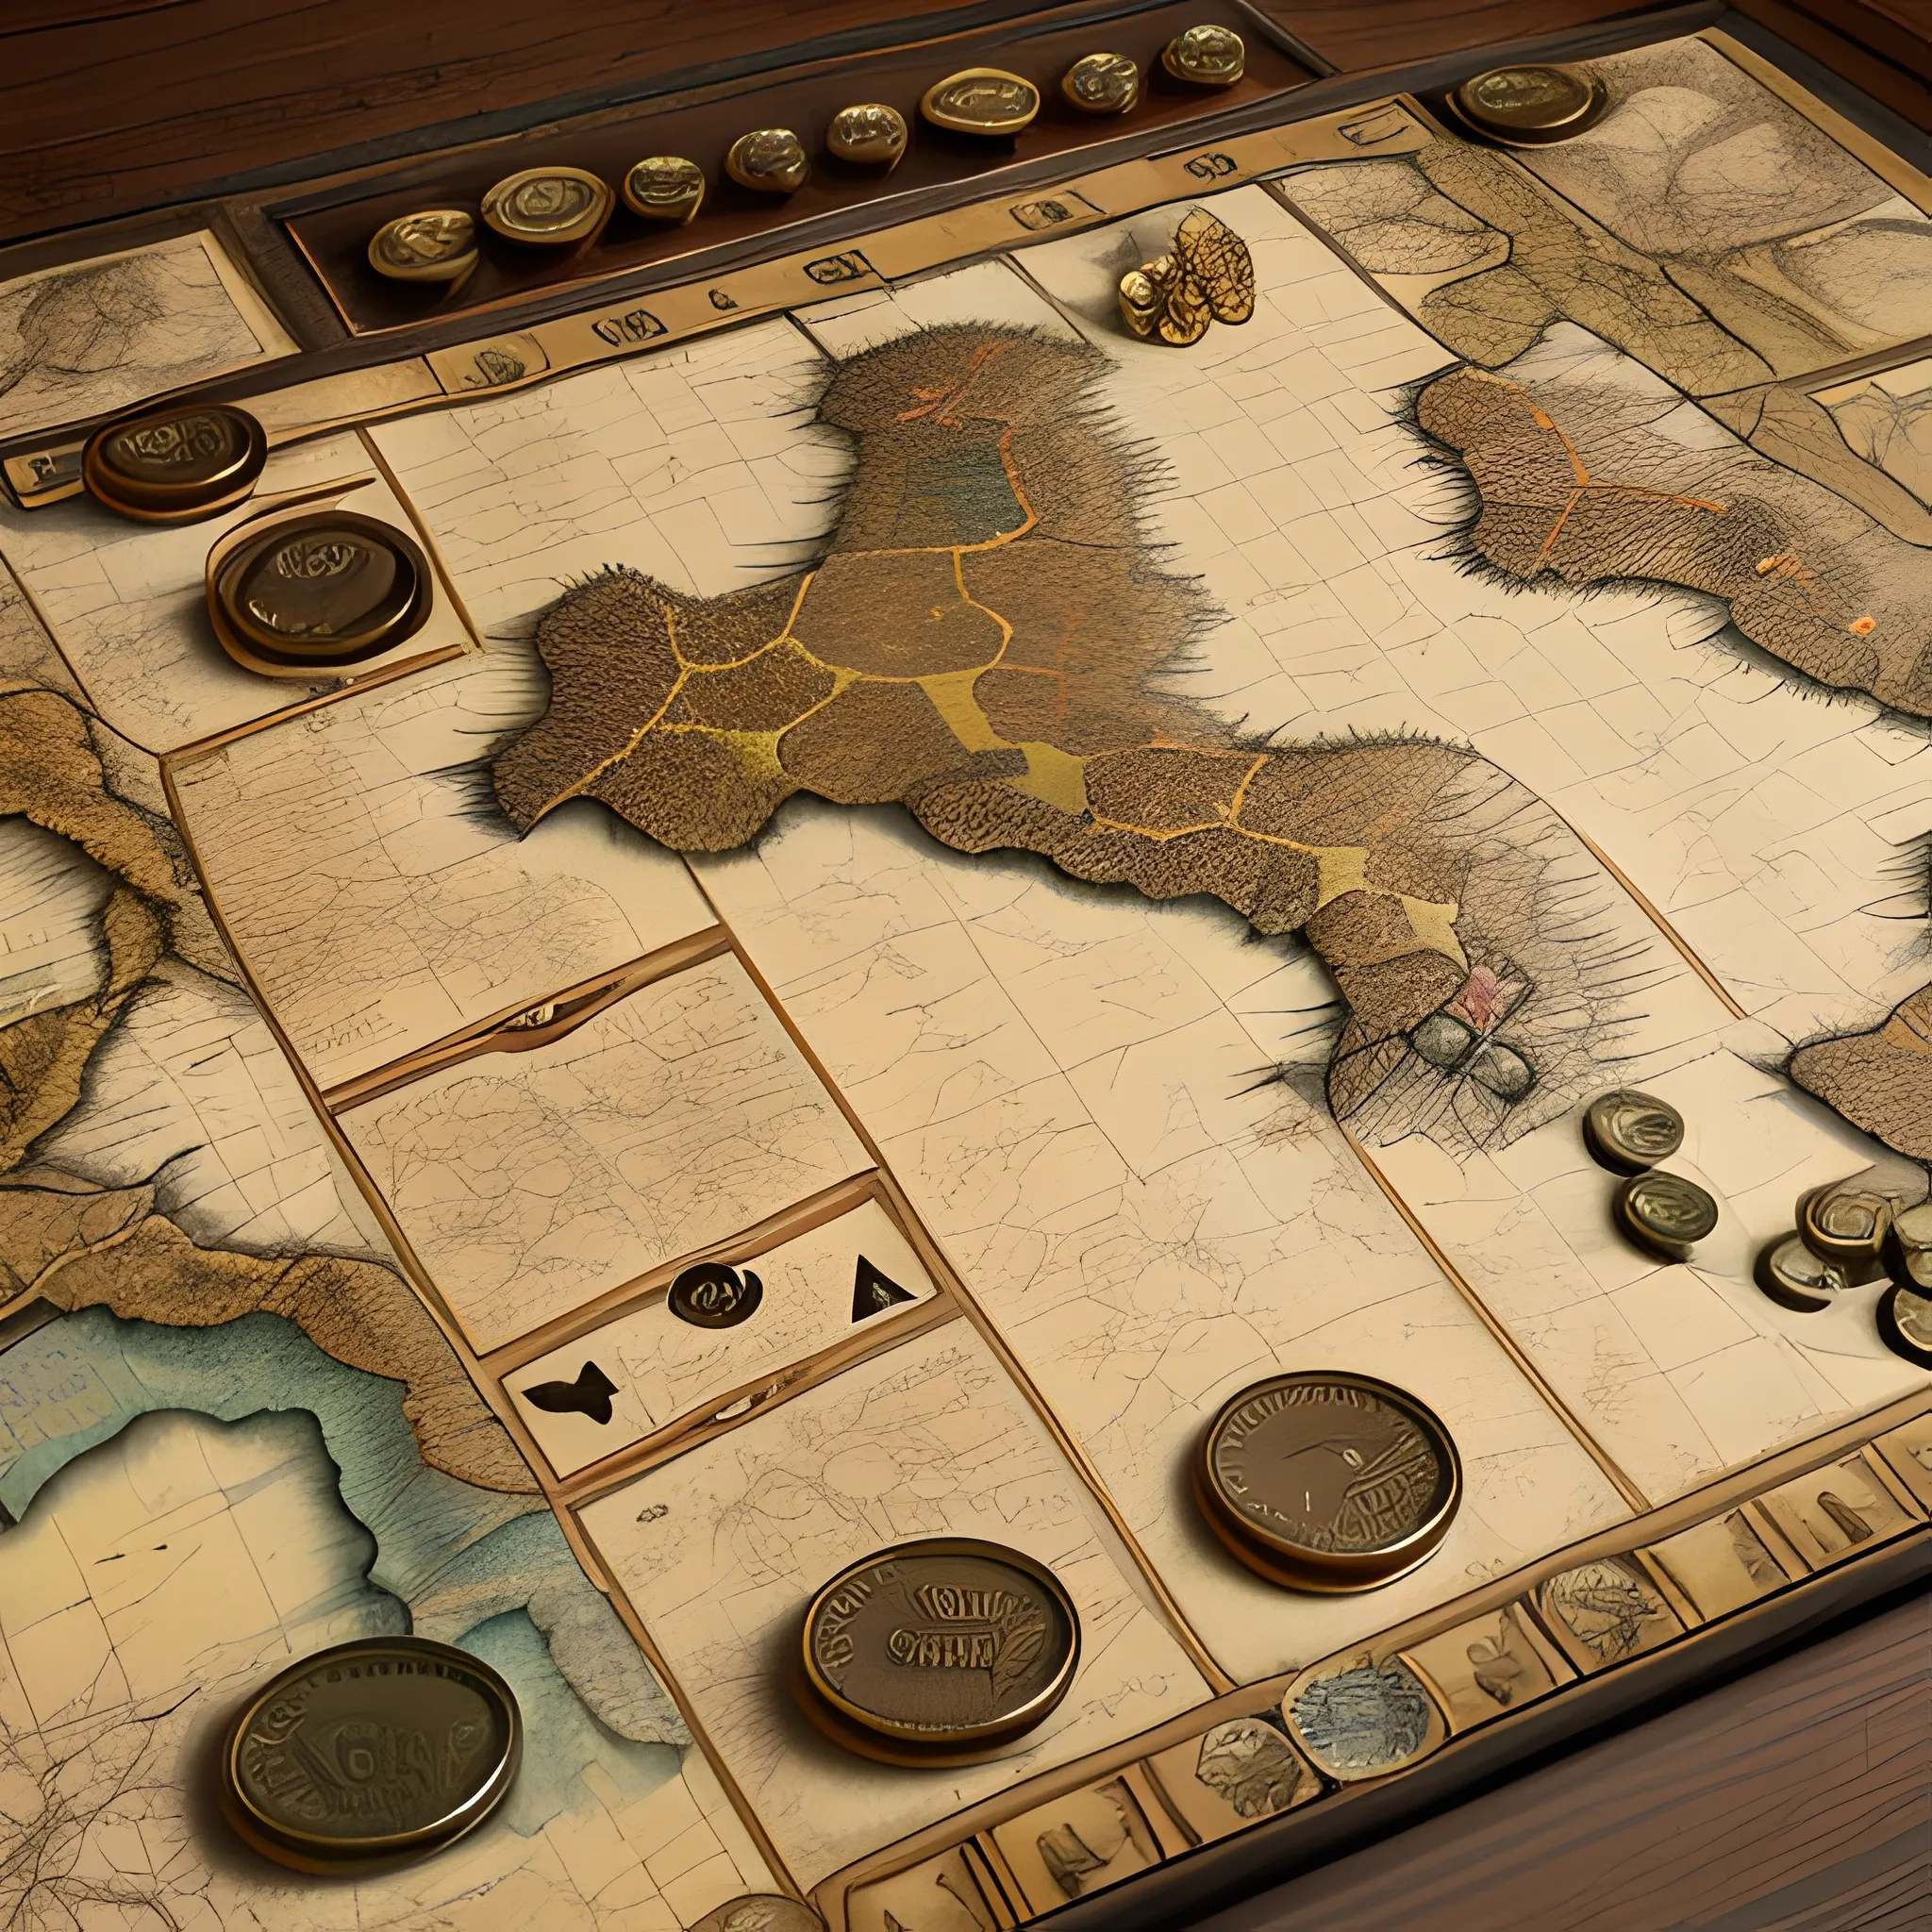 Conceptual image of 19th century military strategy board game based on Argentina. Continental map, strategic resources, army unit tokens, gold coins. High detail, high definition, cinematic scene.